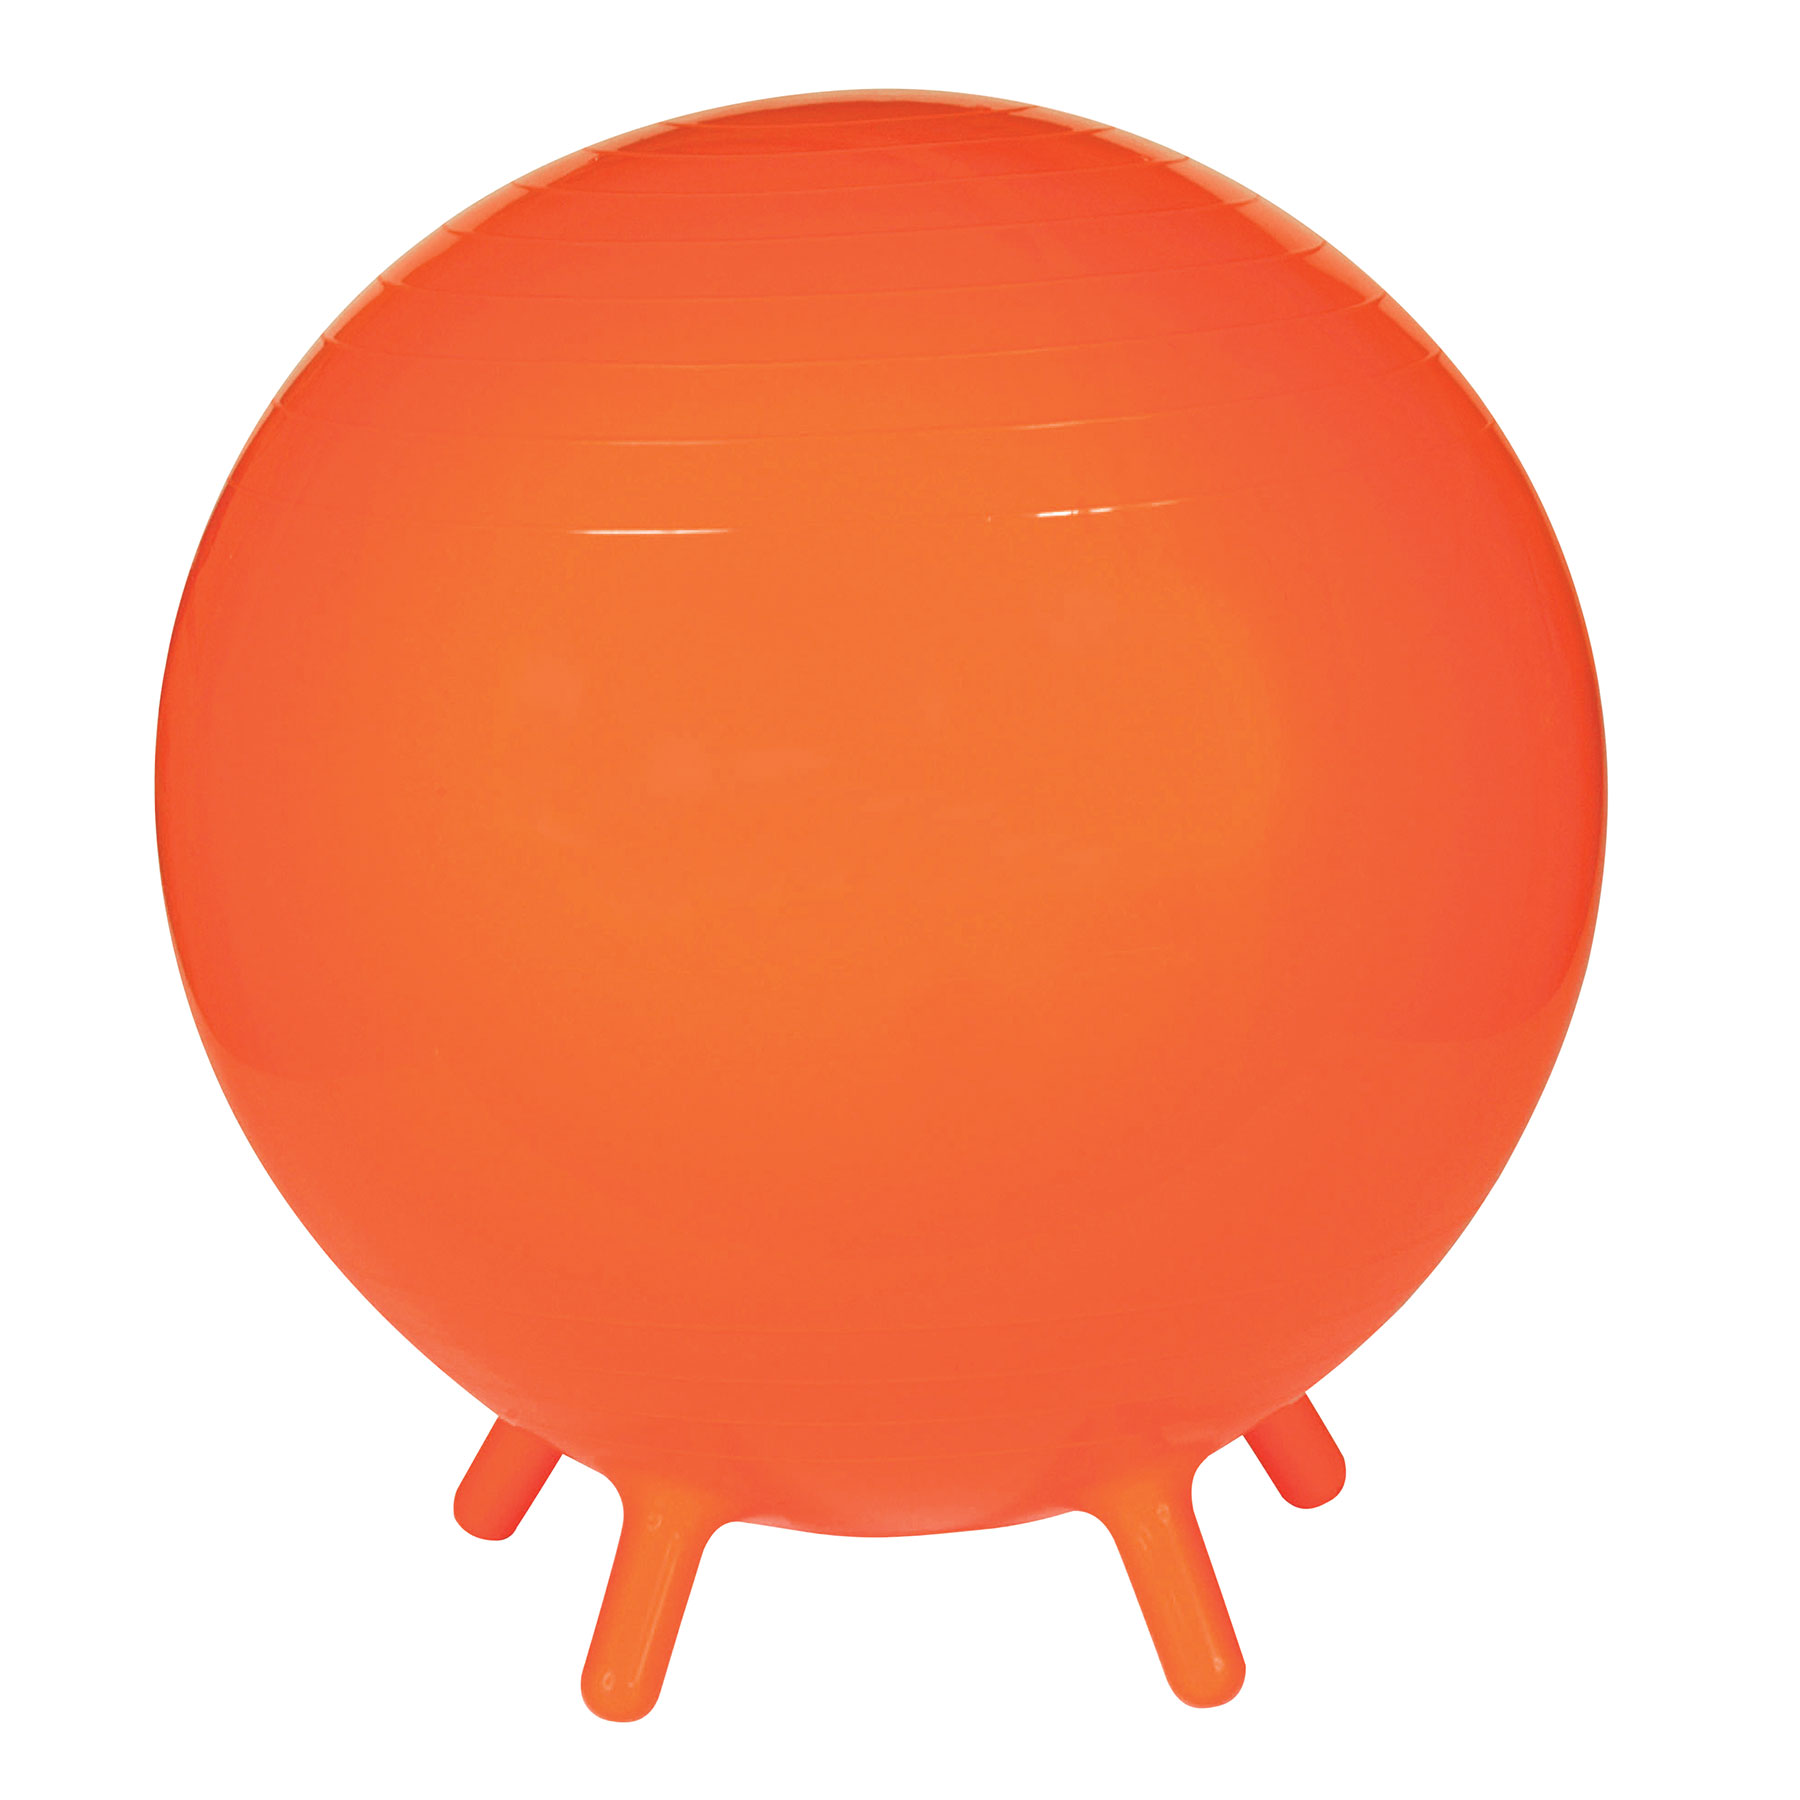 22" Exercise Ball with Legs